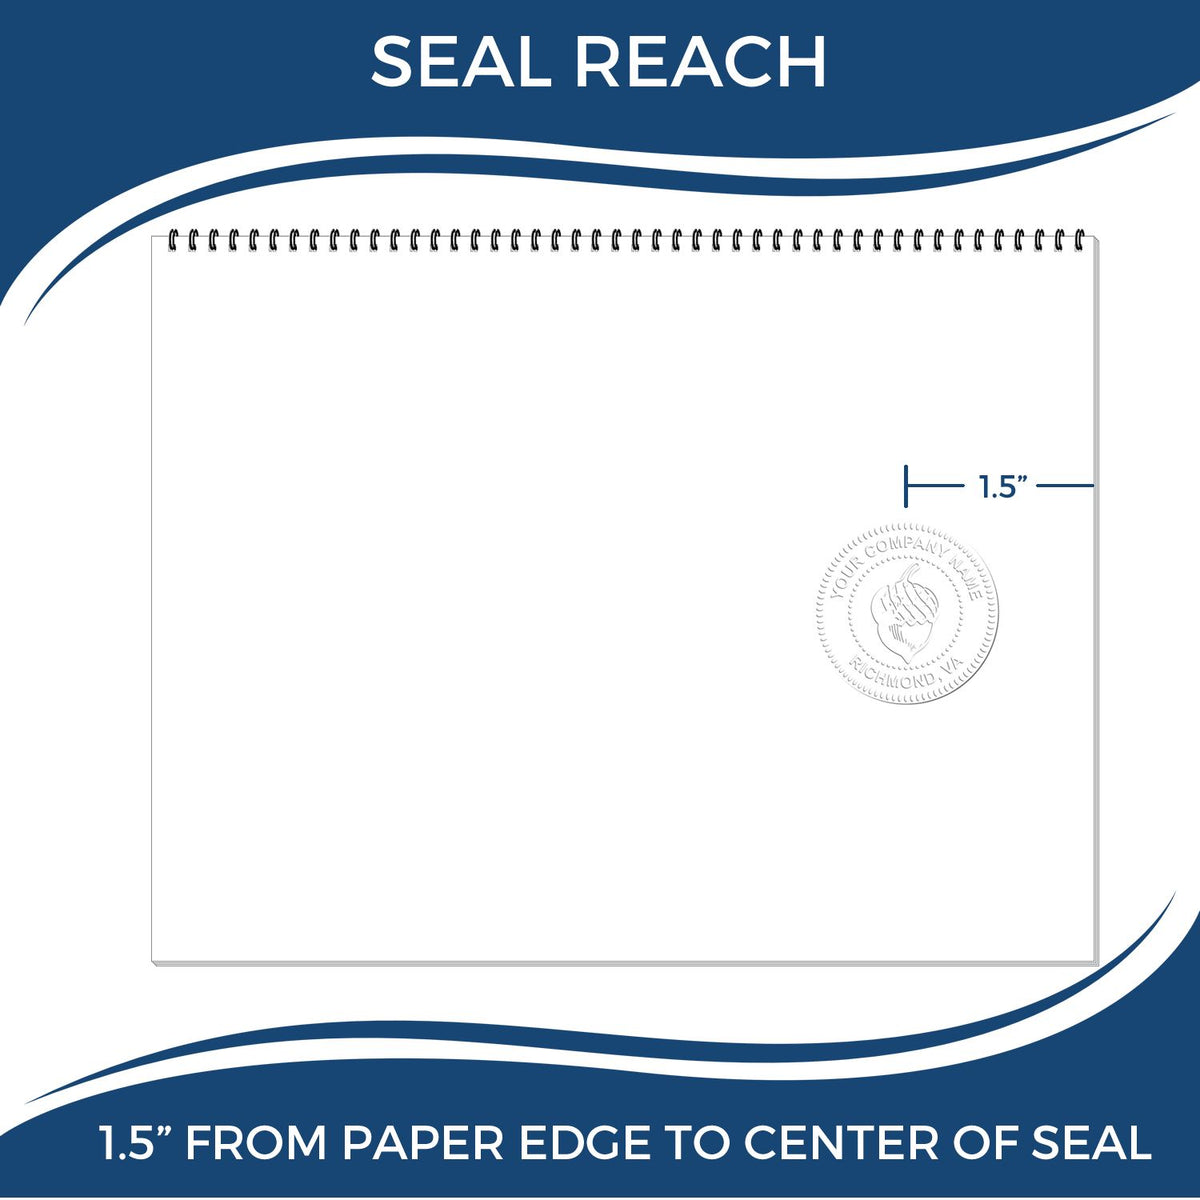 An infographic showing the seal reach which is represented by a ruler and a miniature seal image of the New Jersey Desk Architect Embossing Seal